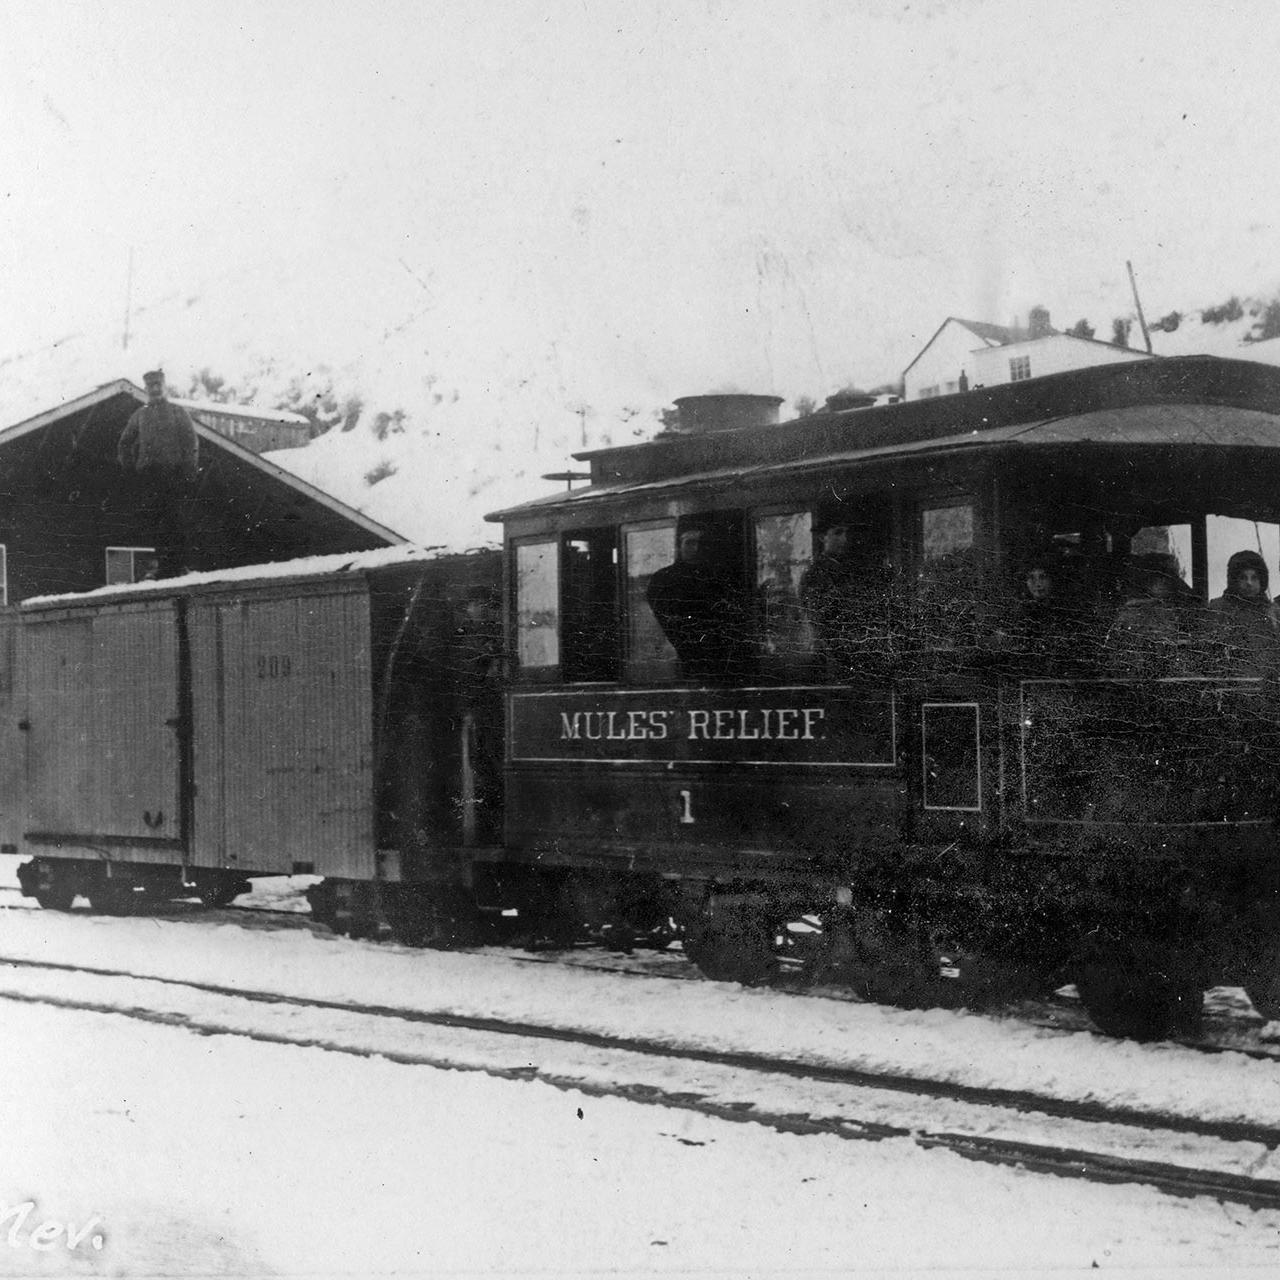 Mules Relief in Clifton with Nevada Central Boxcar #202